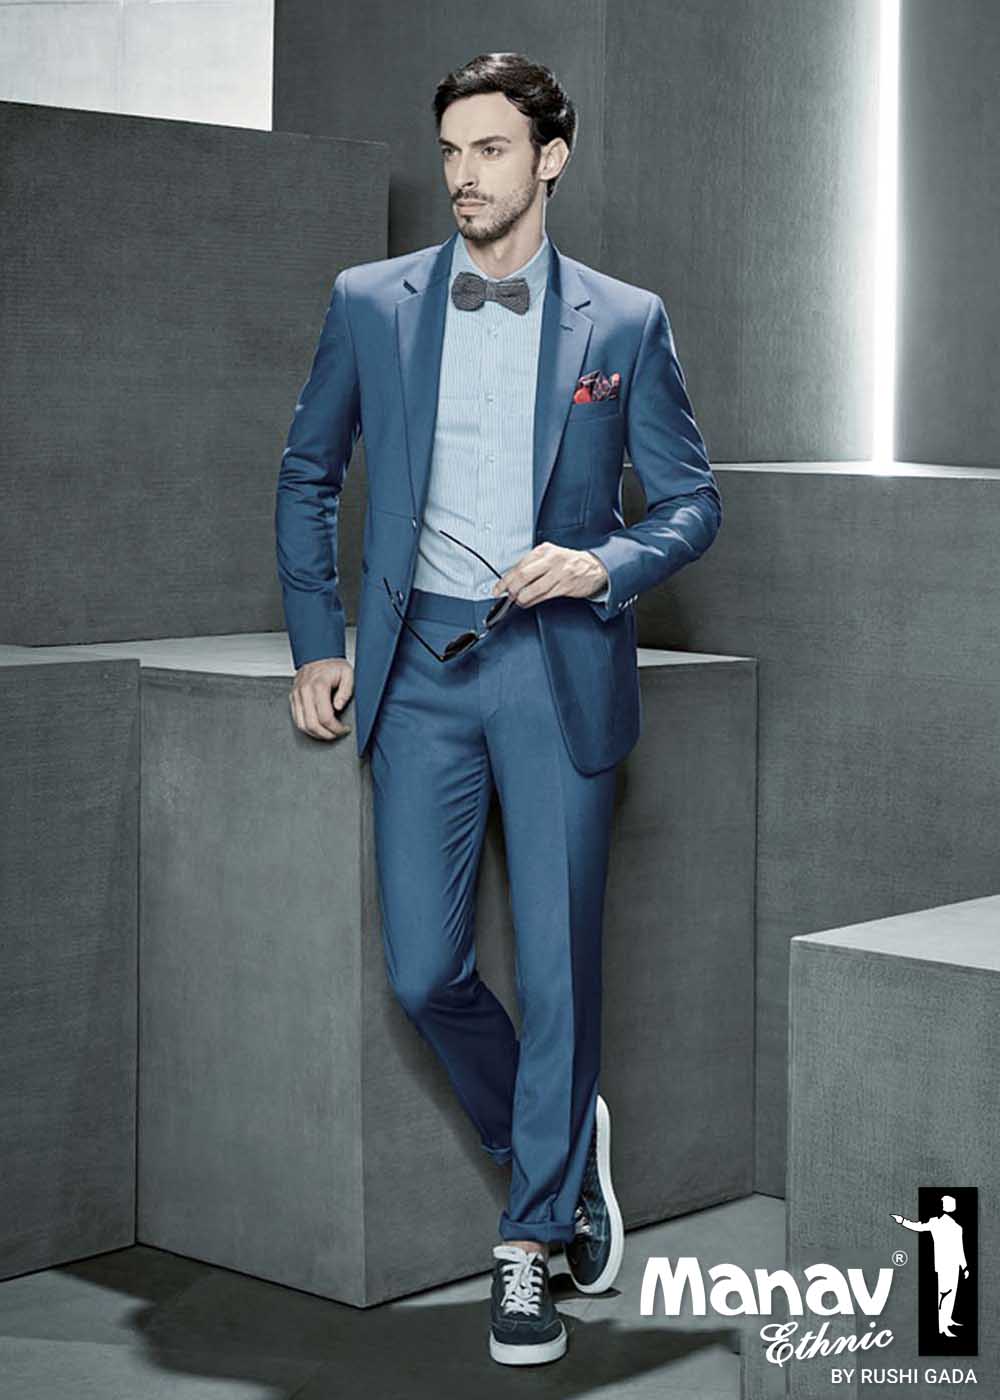 Buy Arrow Tailored Regular Fit Patterned Two Piece Suit - NNNOW.com